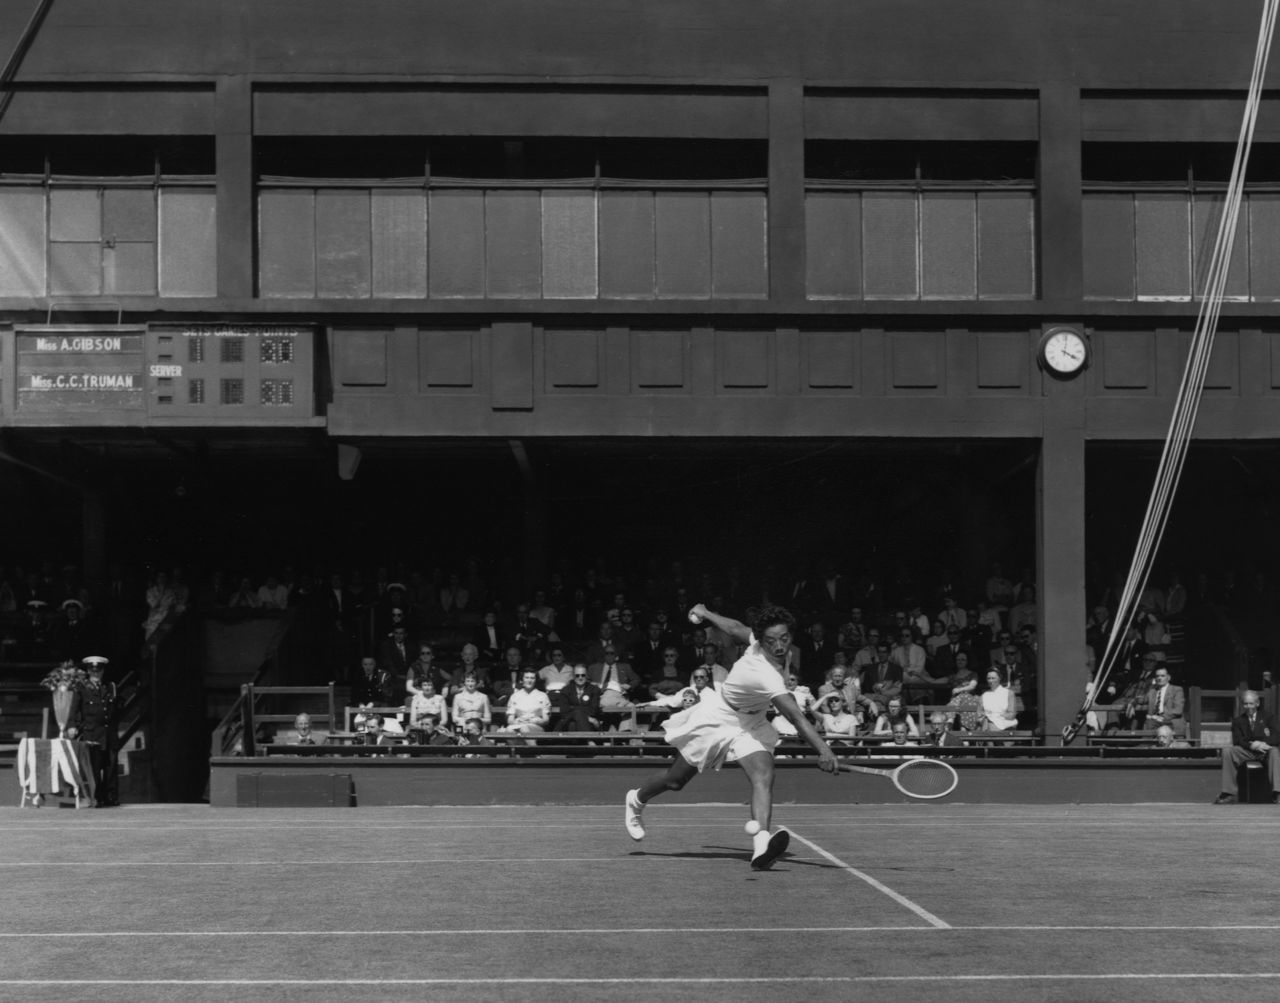 Gibson's successes helped her become the world's top-ranked women's player. In this picture, she plays at the Wightman Cup staged at the All England Tennis Club in 1958.